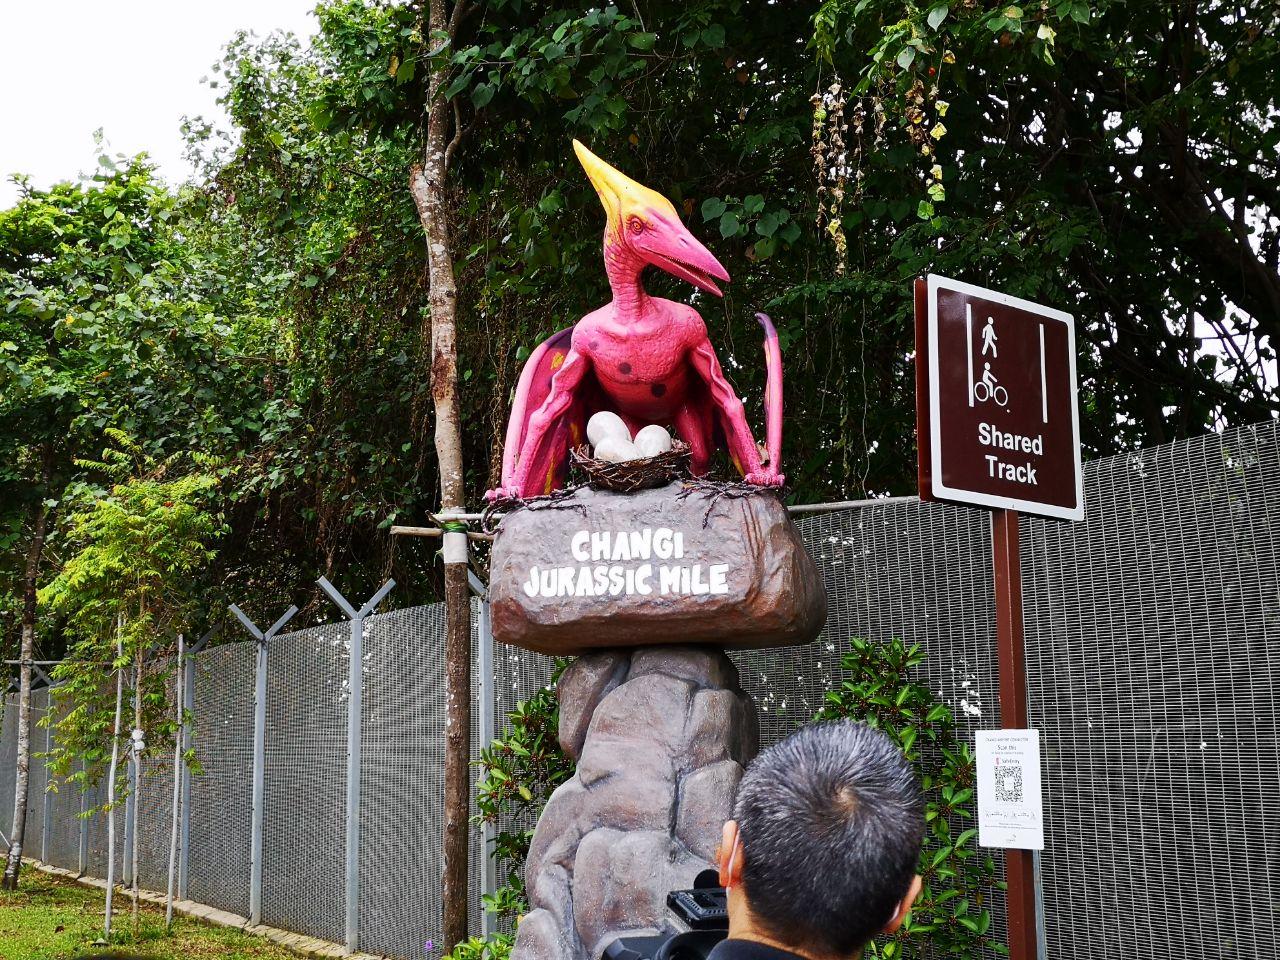 Meet 'lifelike' dinosaurs while jogging or cycling to Changi Airport